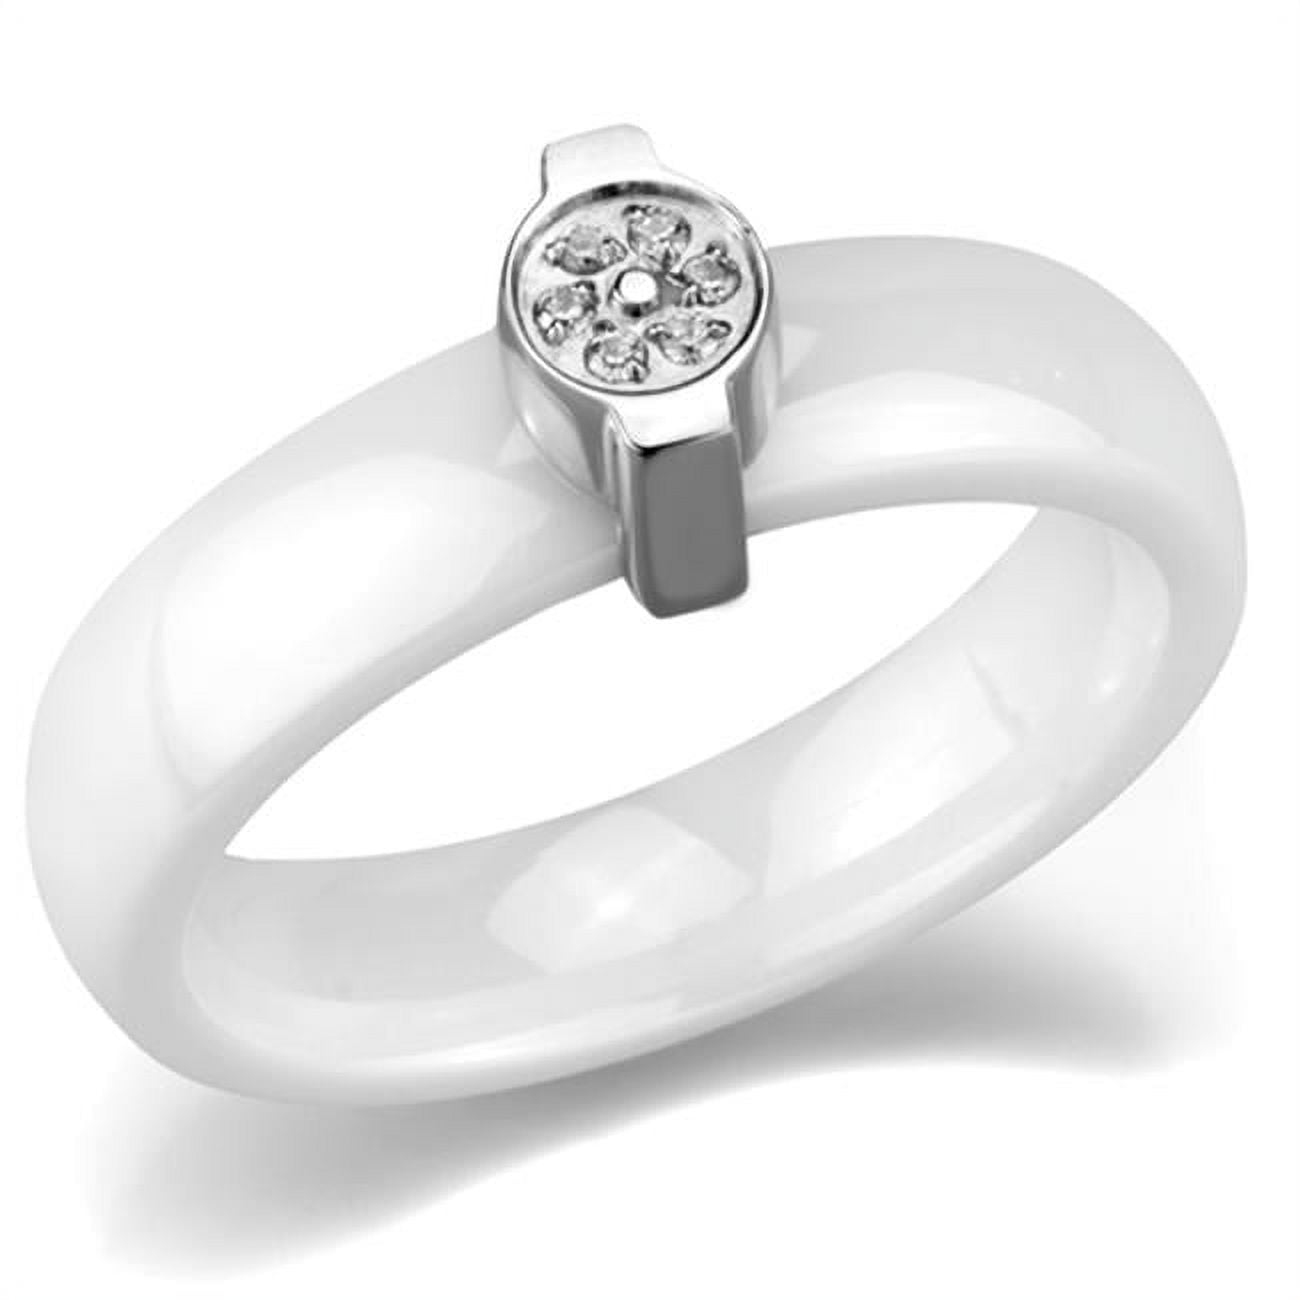 Picture of Alamode 3W958-7 Women High Polished Stainless Steel Ring with Ceramic in White - Size 7